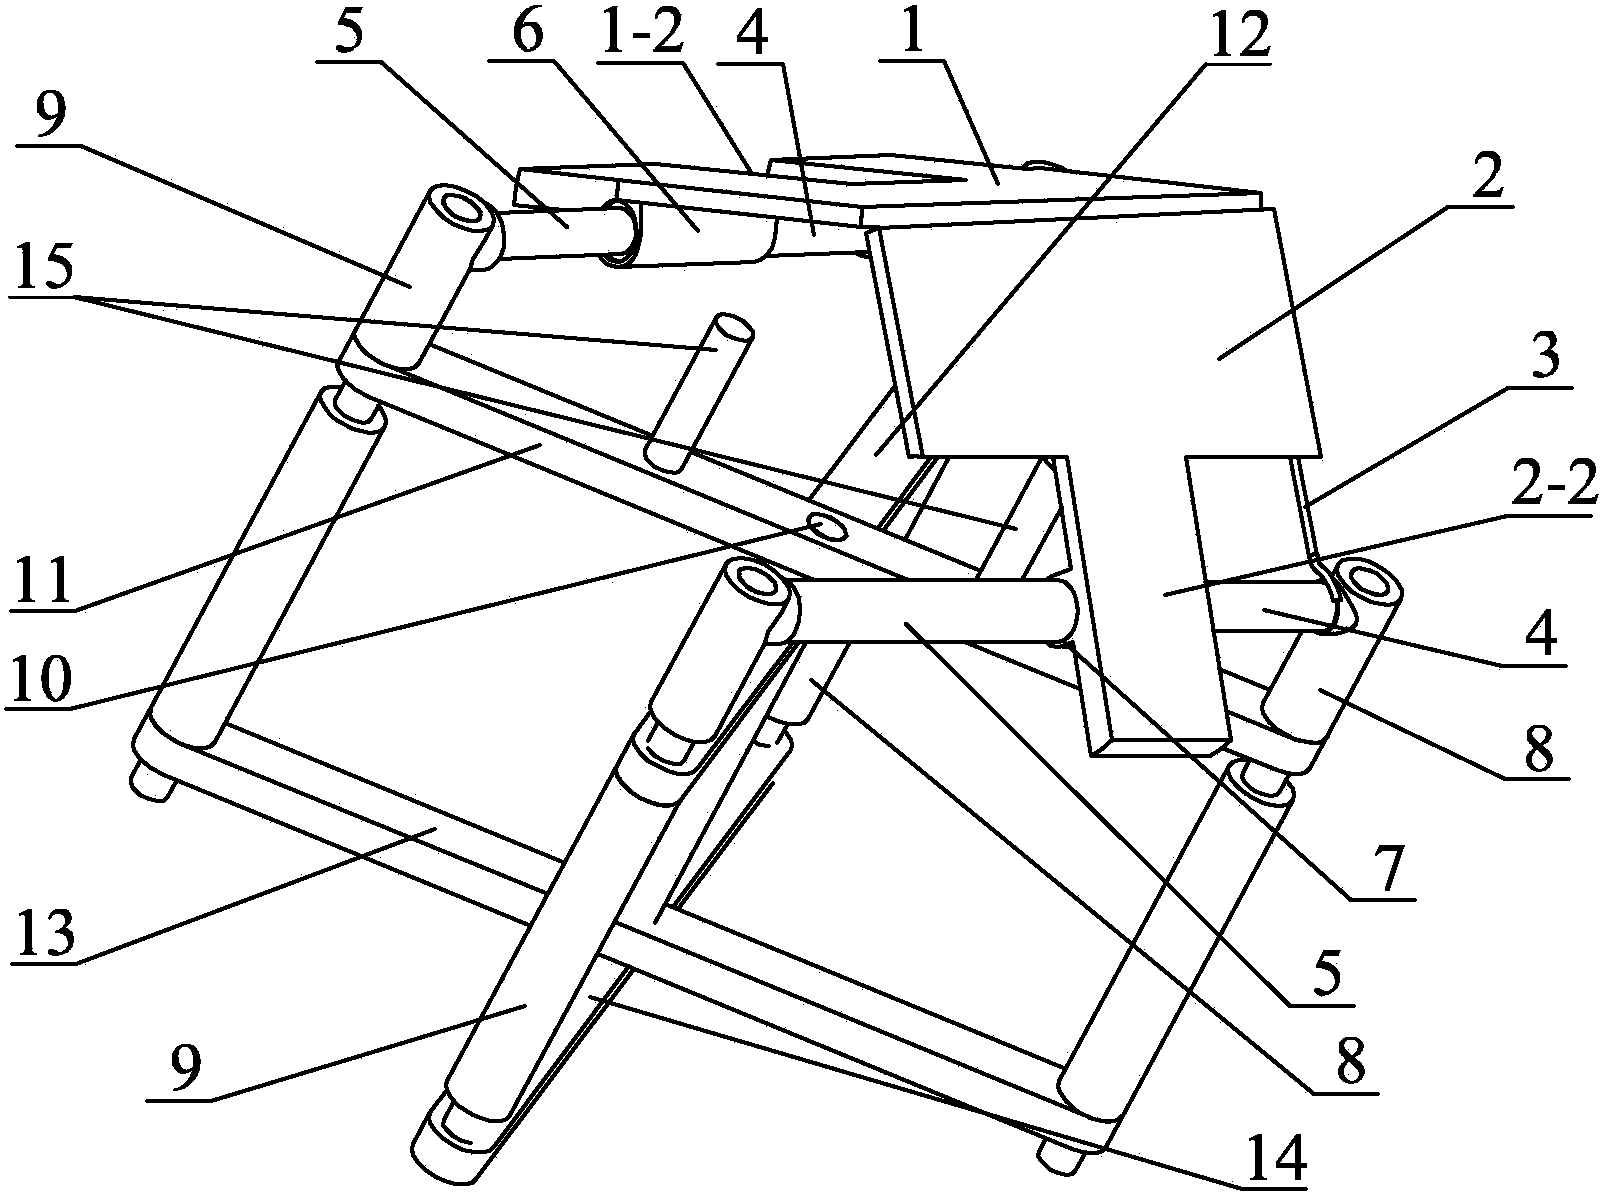 Foldable circular-arc-shaped supporting device